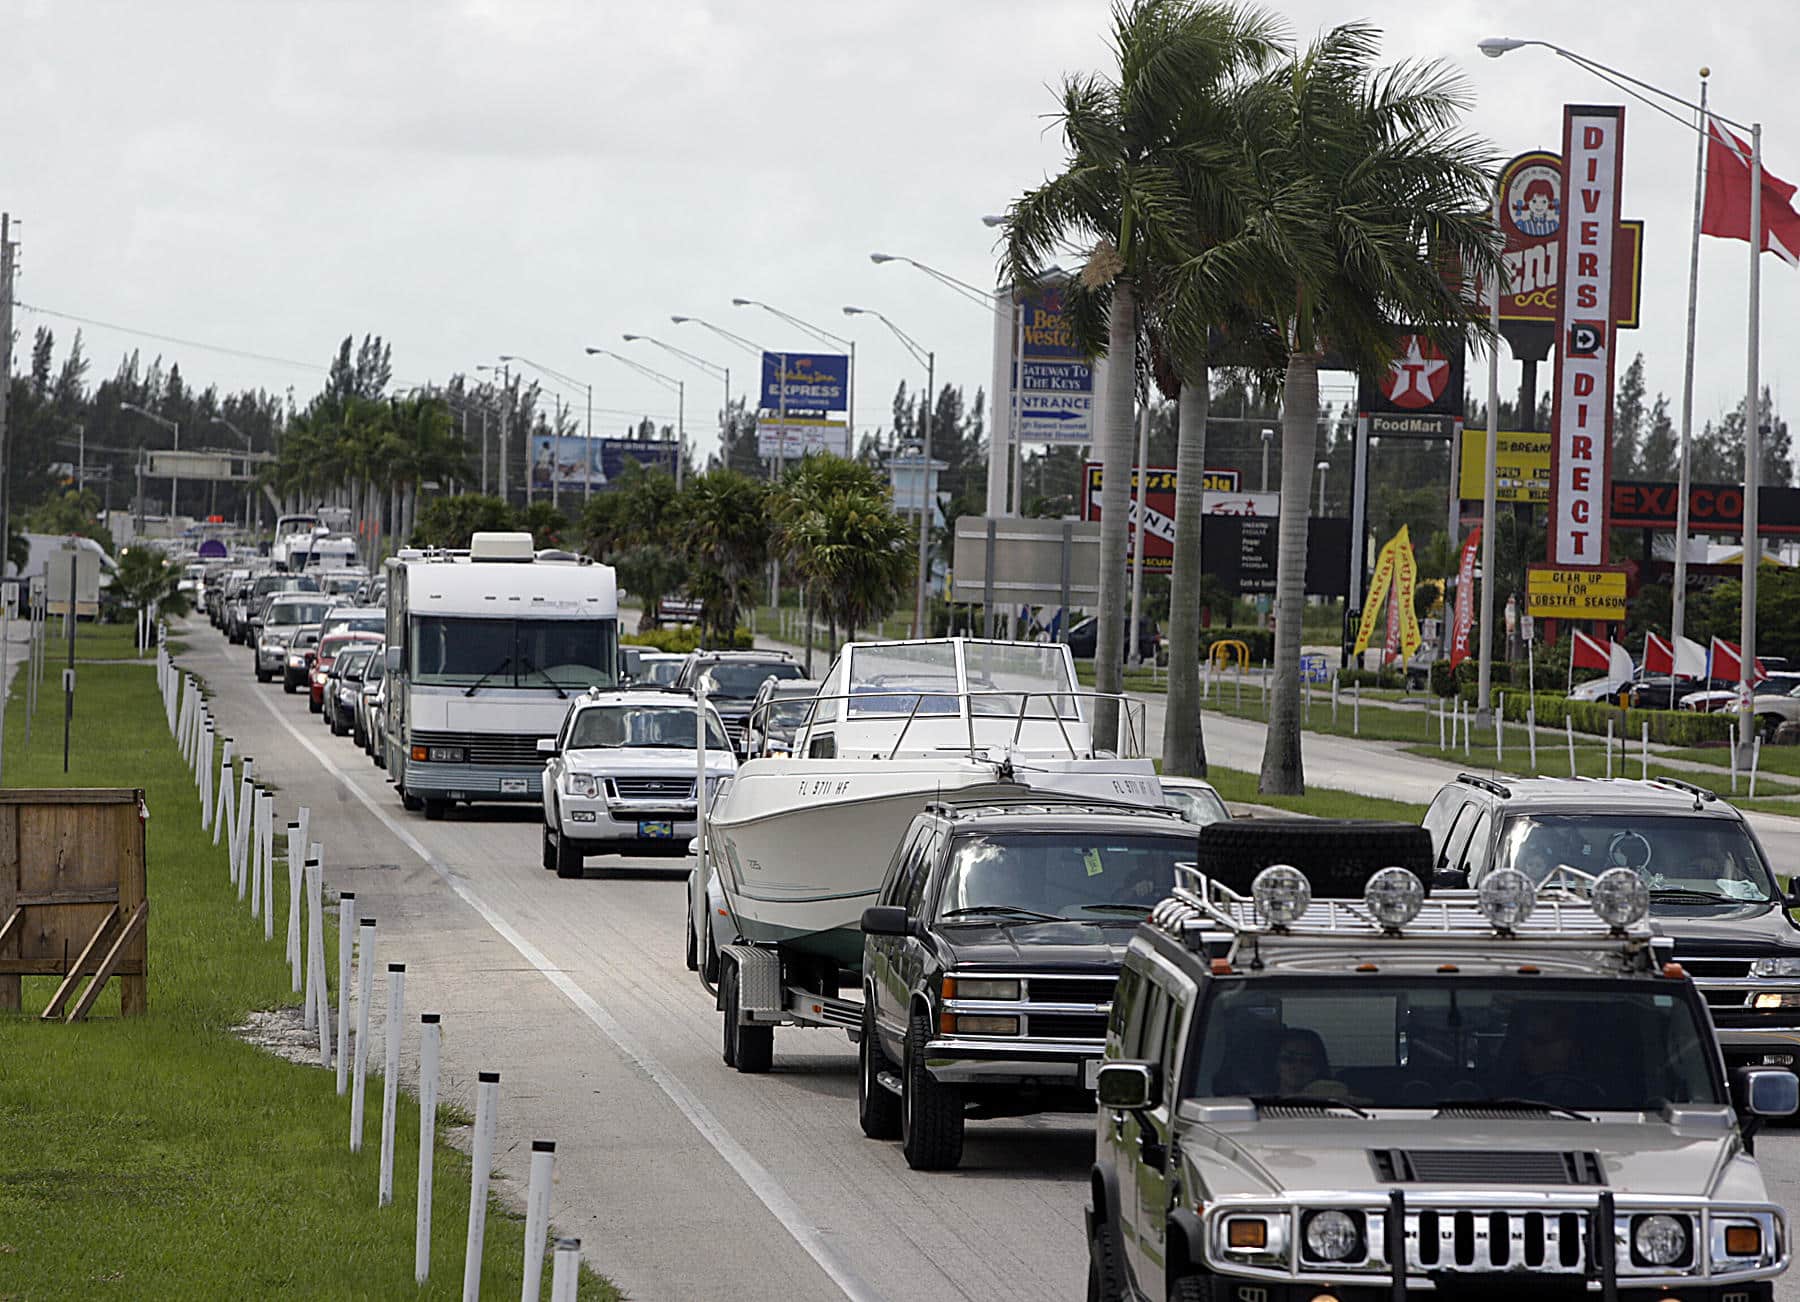 Cars lining up on the road to evacuate in florida